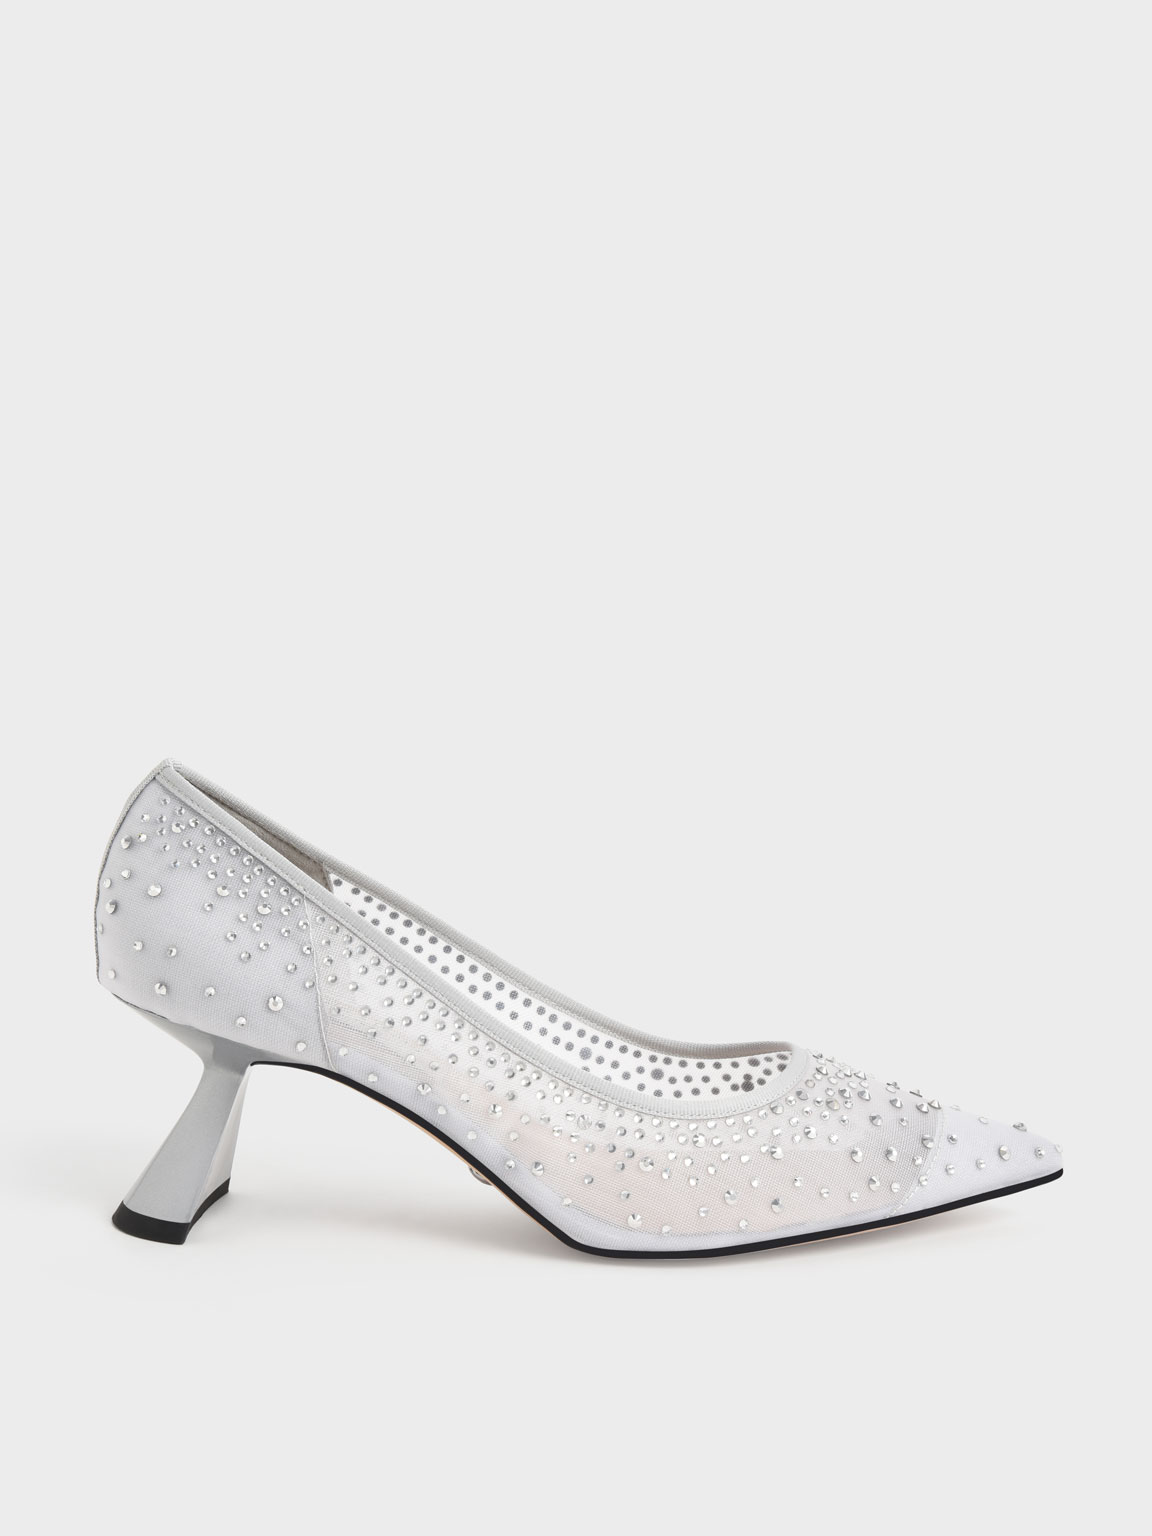 Silver Shoes, Silver Embellished Shoes